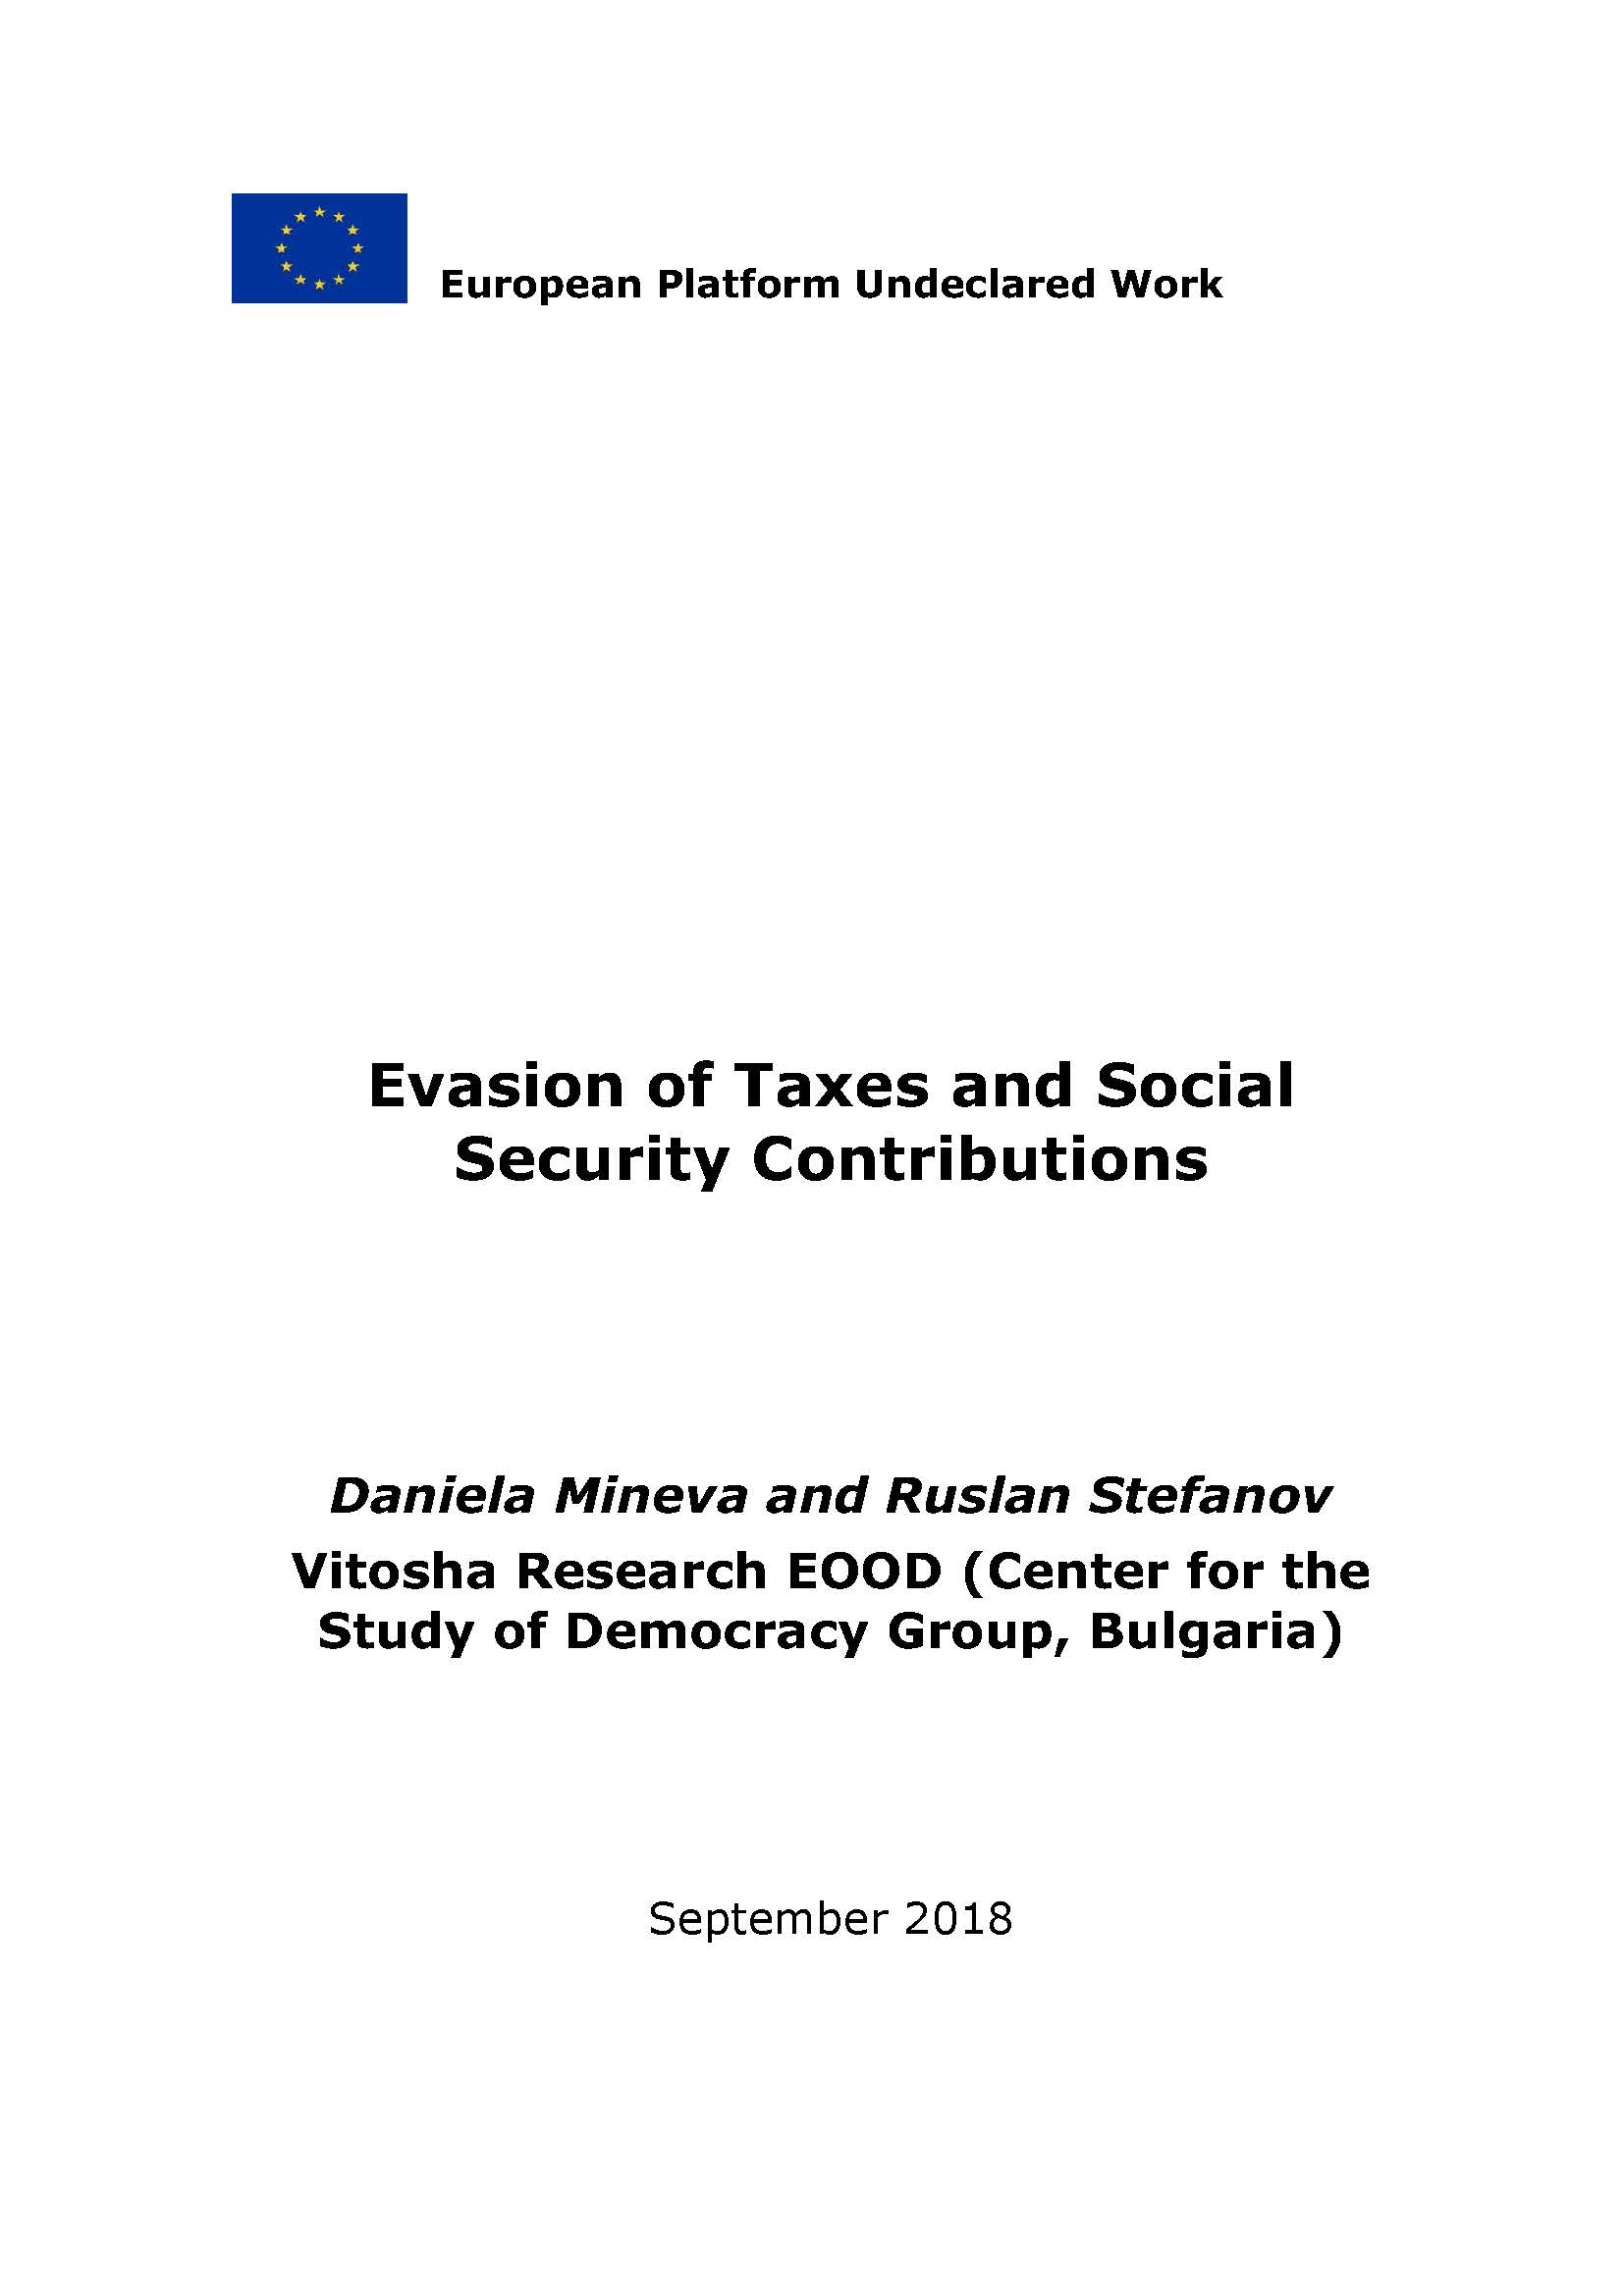 Evasion of Taxes and Social Security Contributions